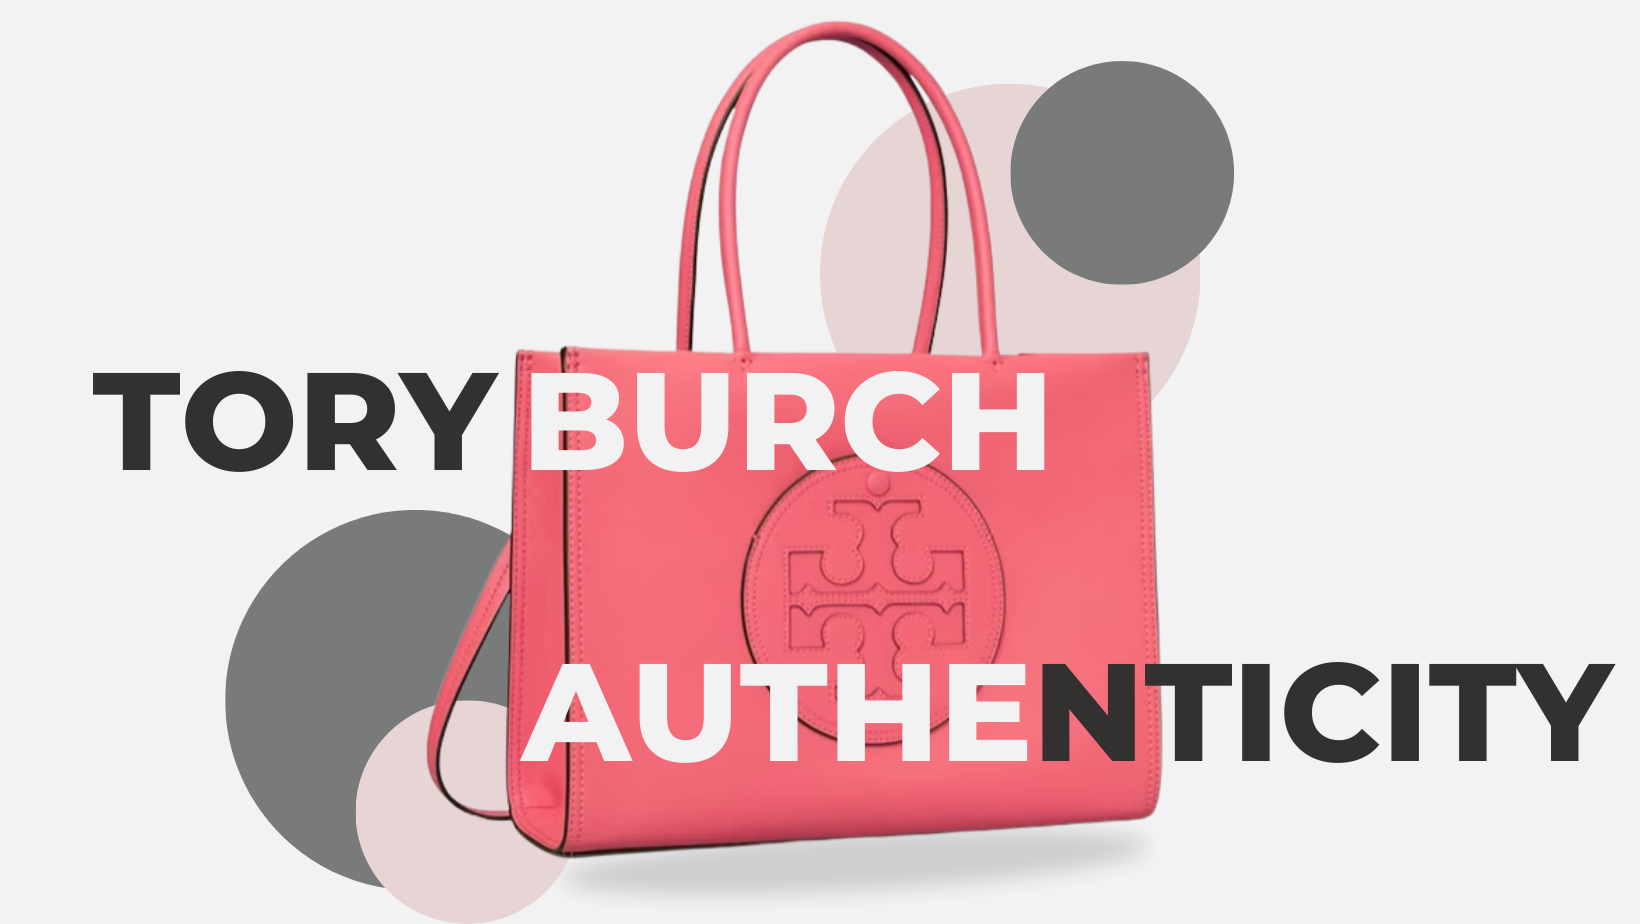 How to Tell if Your Tory Burch Handbag is Genuine: The Mark of